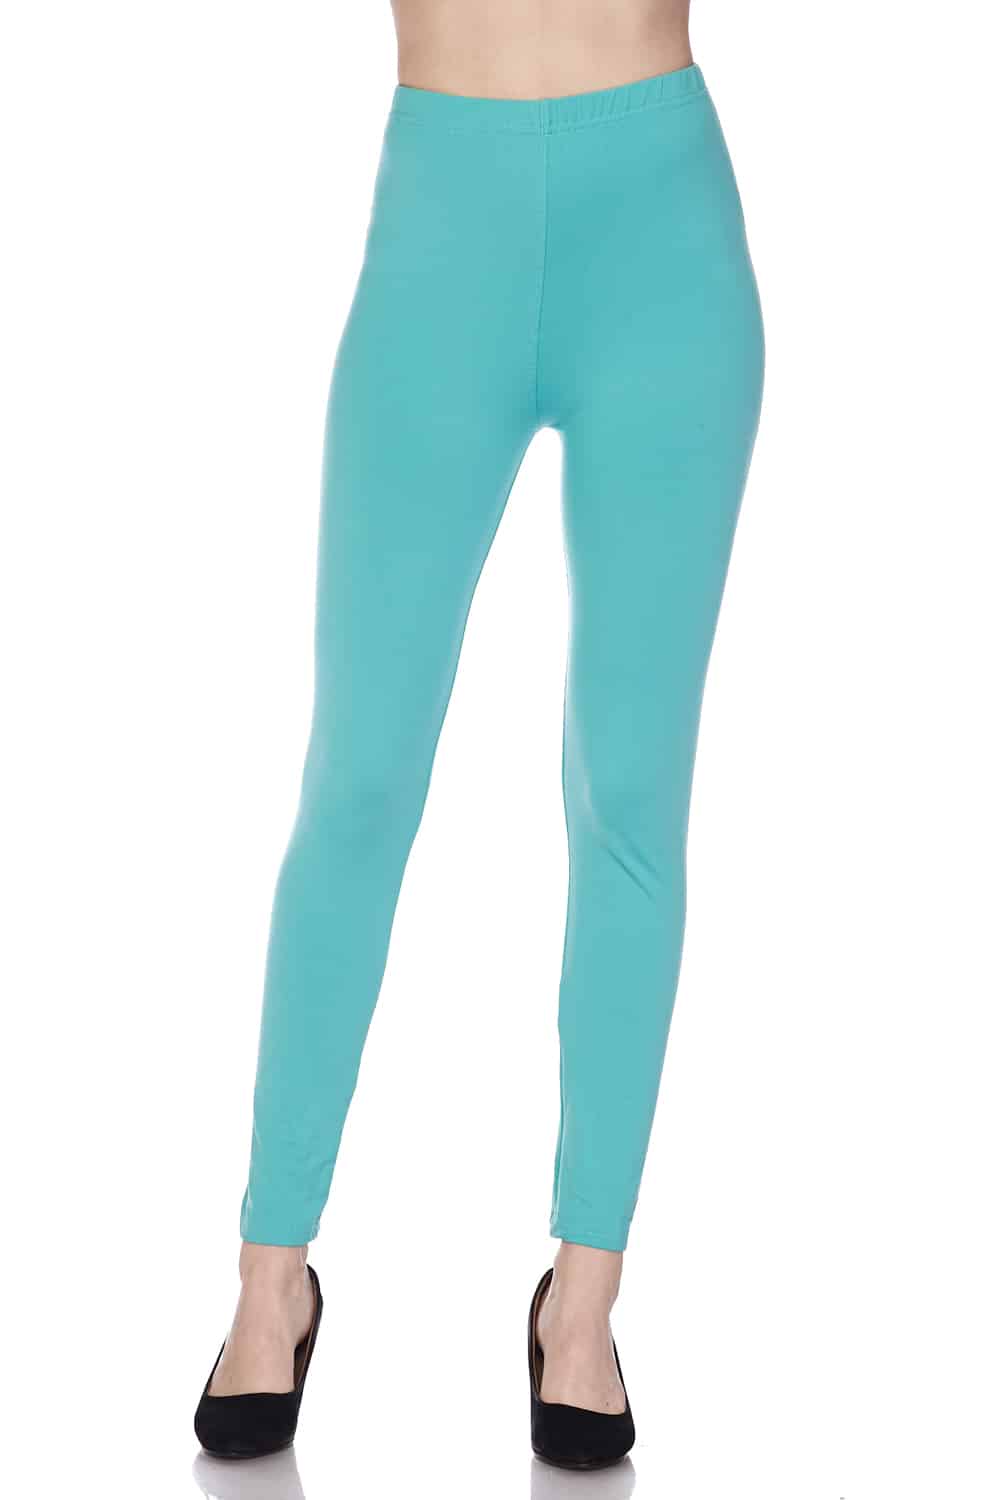 Solid Color 1 Inch Mid Waisted Brushed Ankle Leggings - Its All Leggings